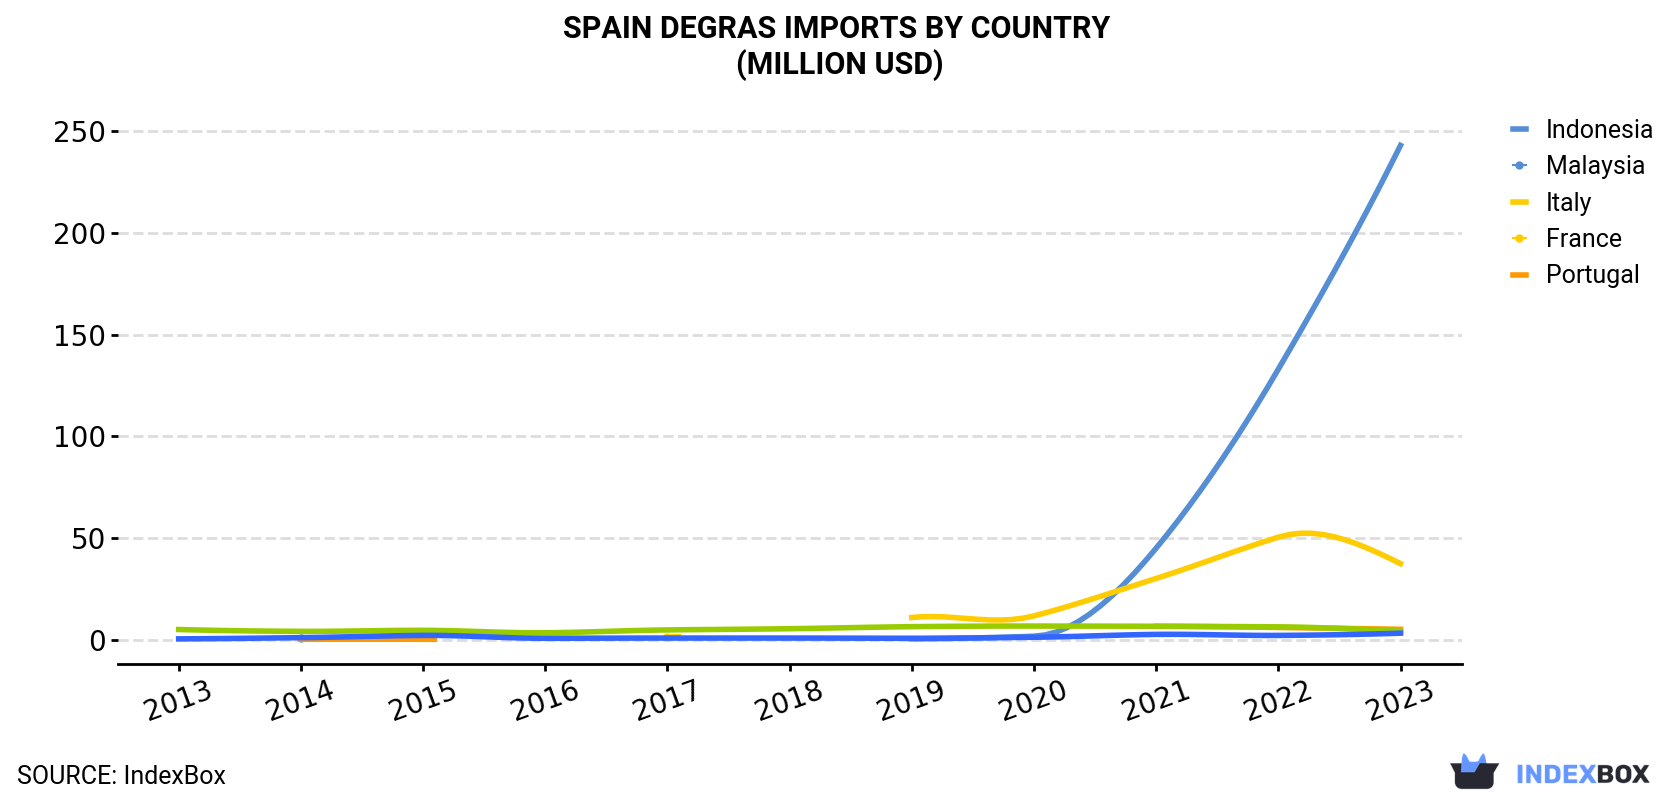 Spain Degras Imports By Country (Million USD)